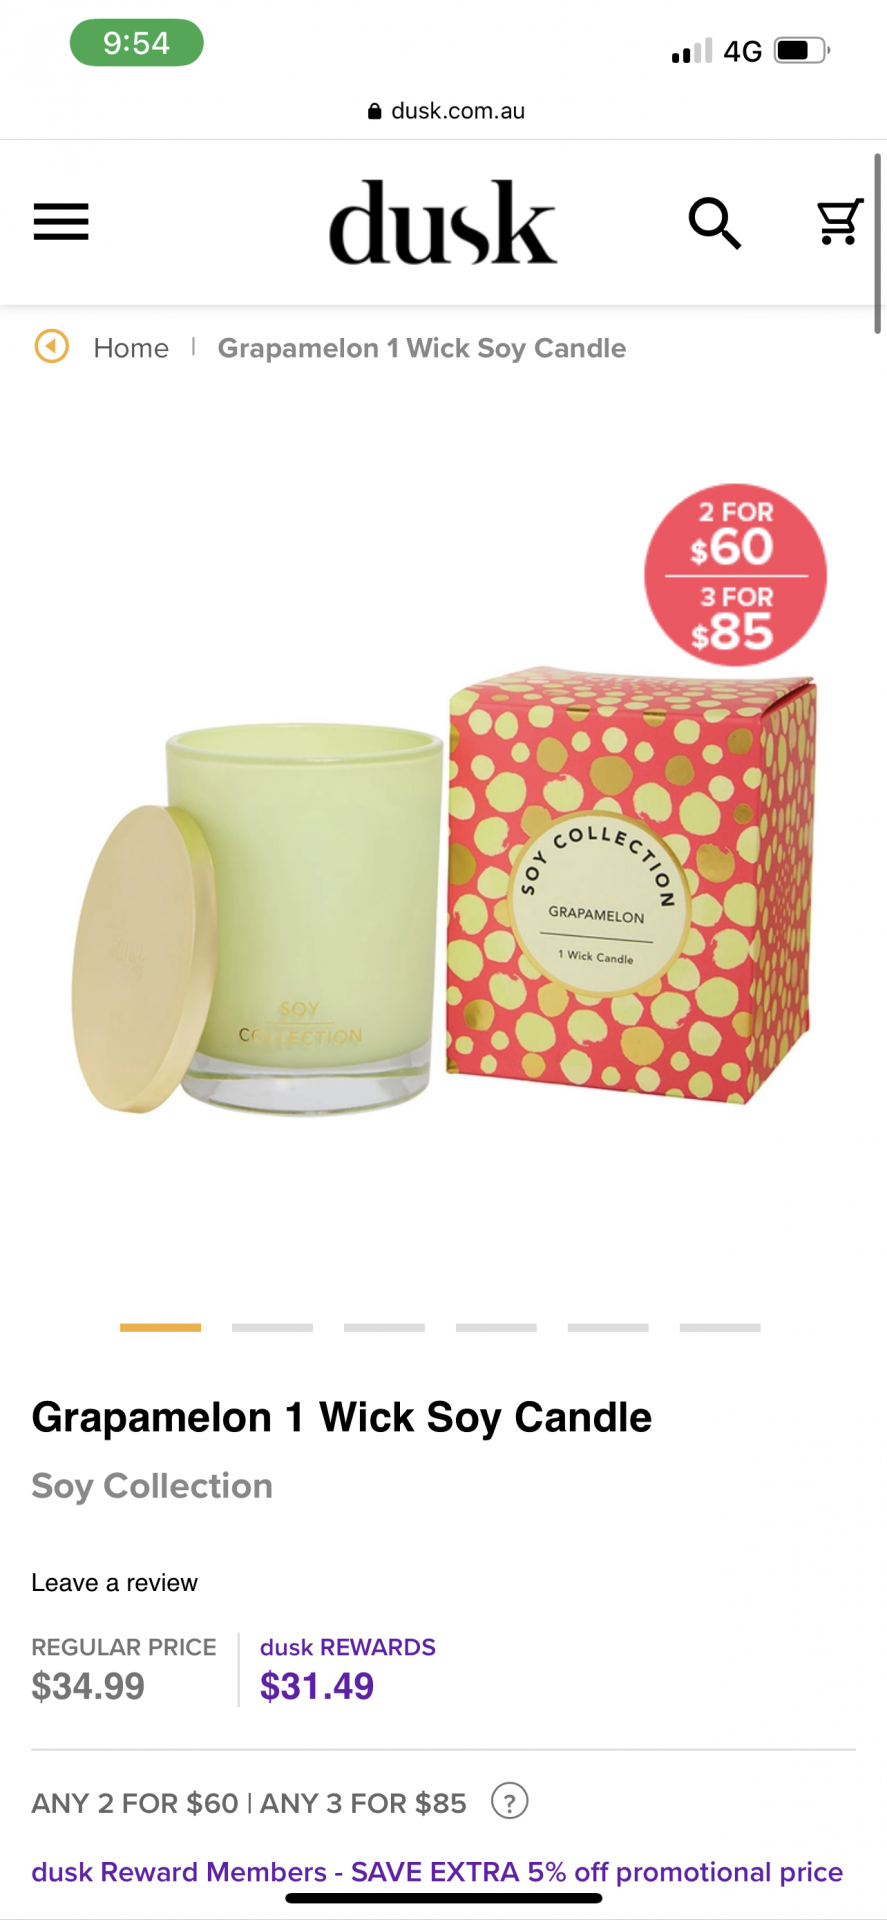 Grapamelon 1 Wick Soy Candle